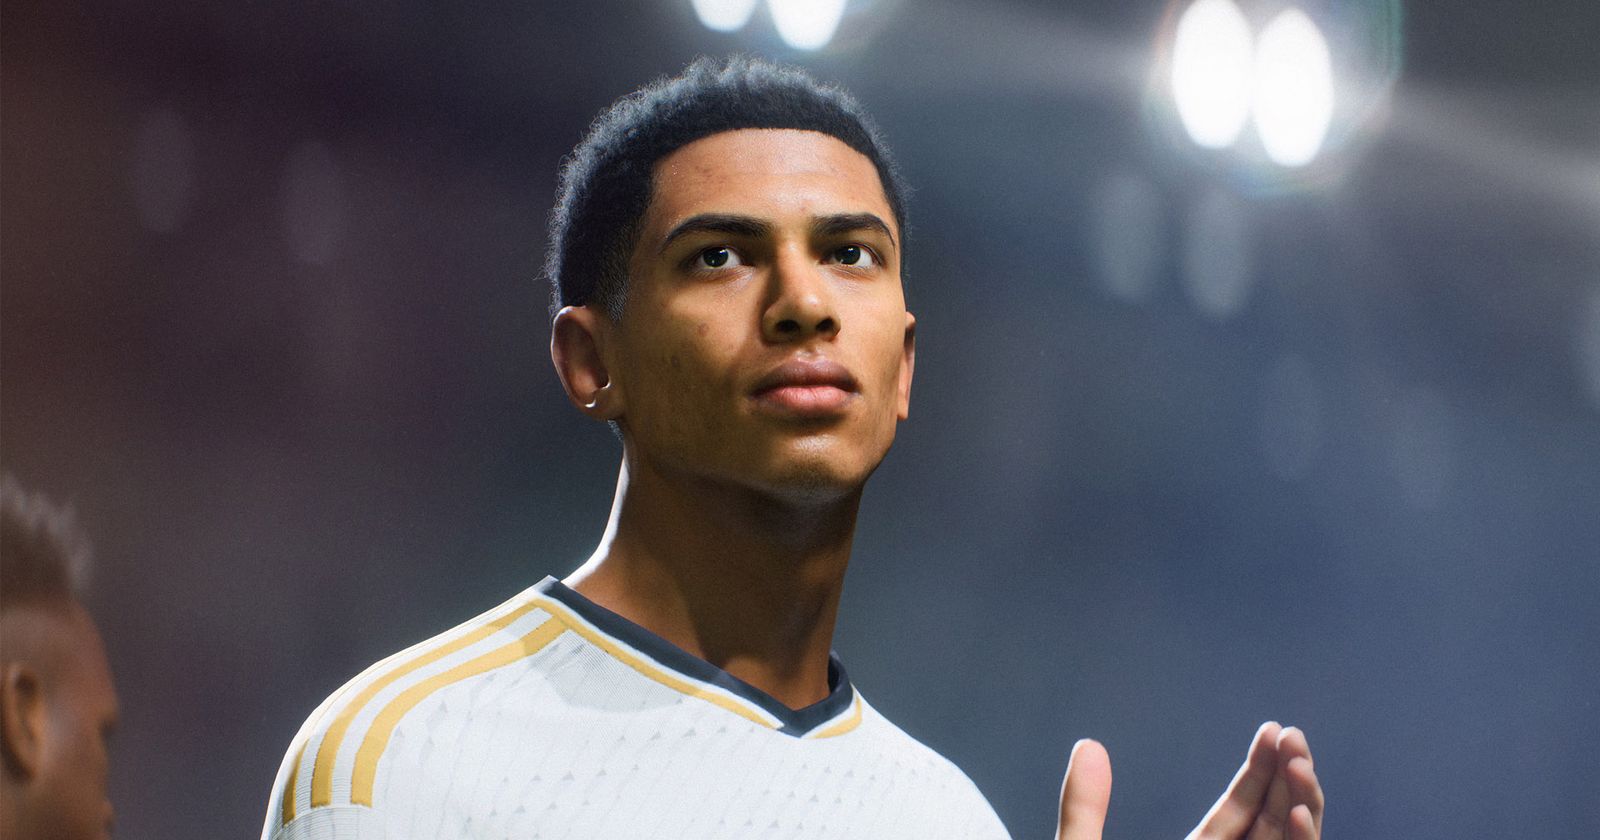 The top 10 highest-rated EA FC 24 players have been 'leaked